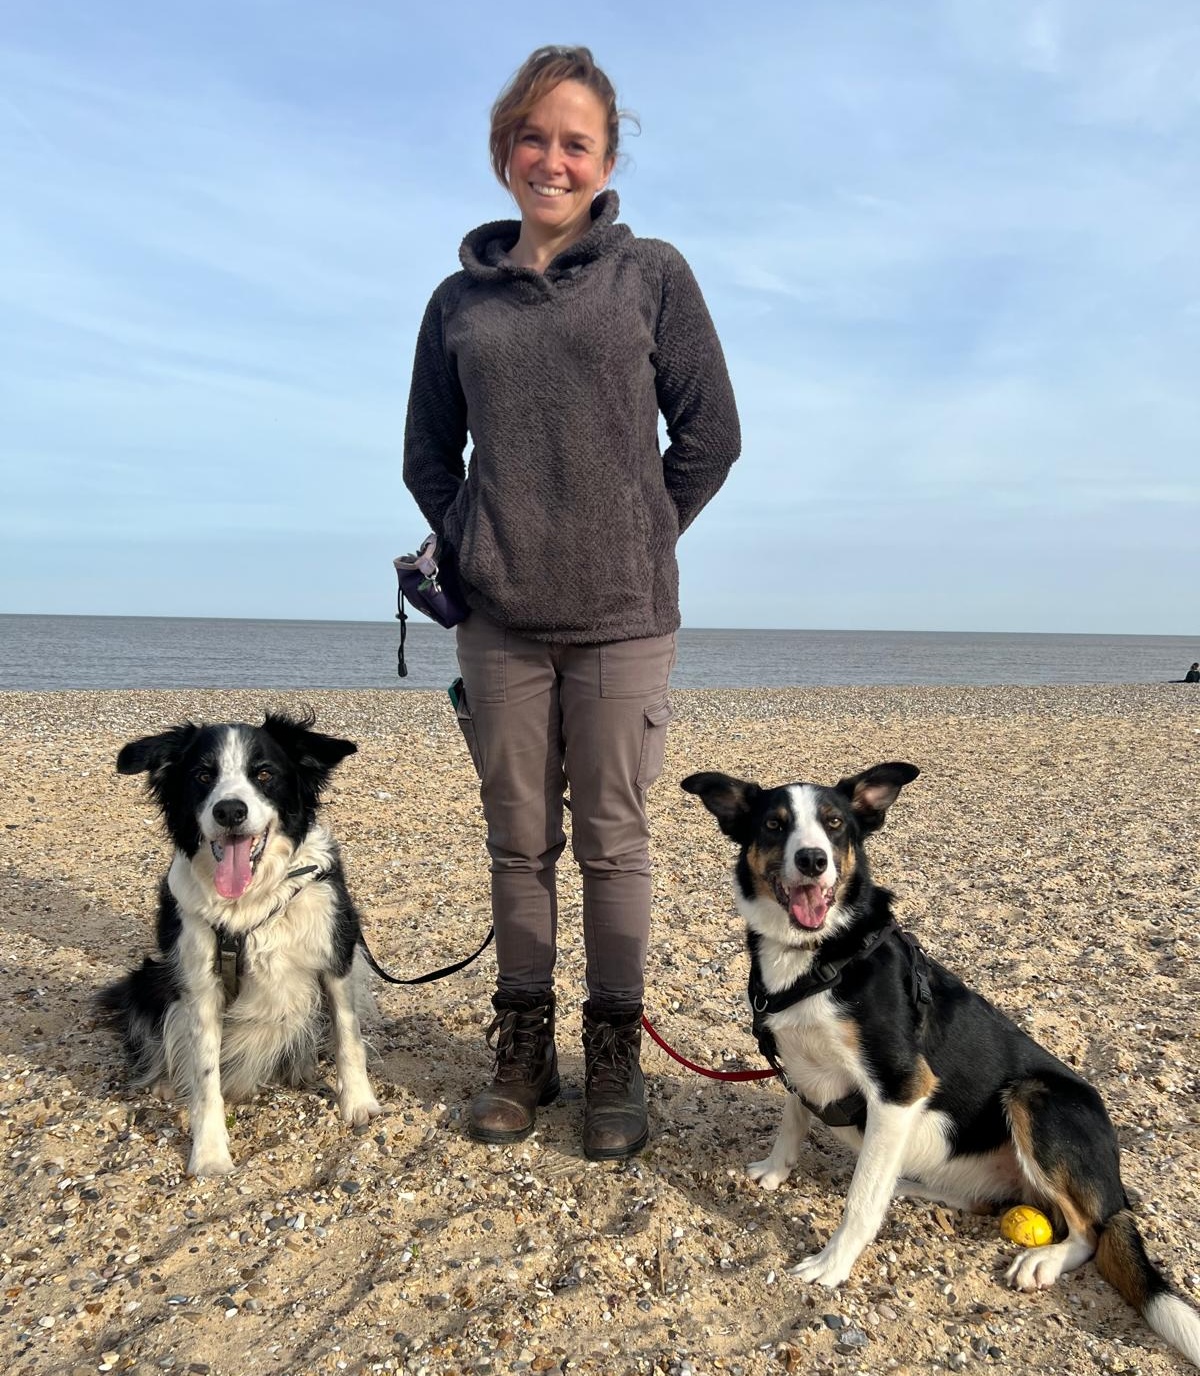 About the collie consultant - Gemma Grisewood